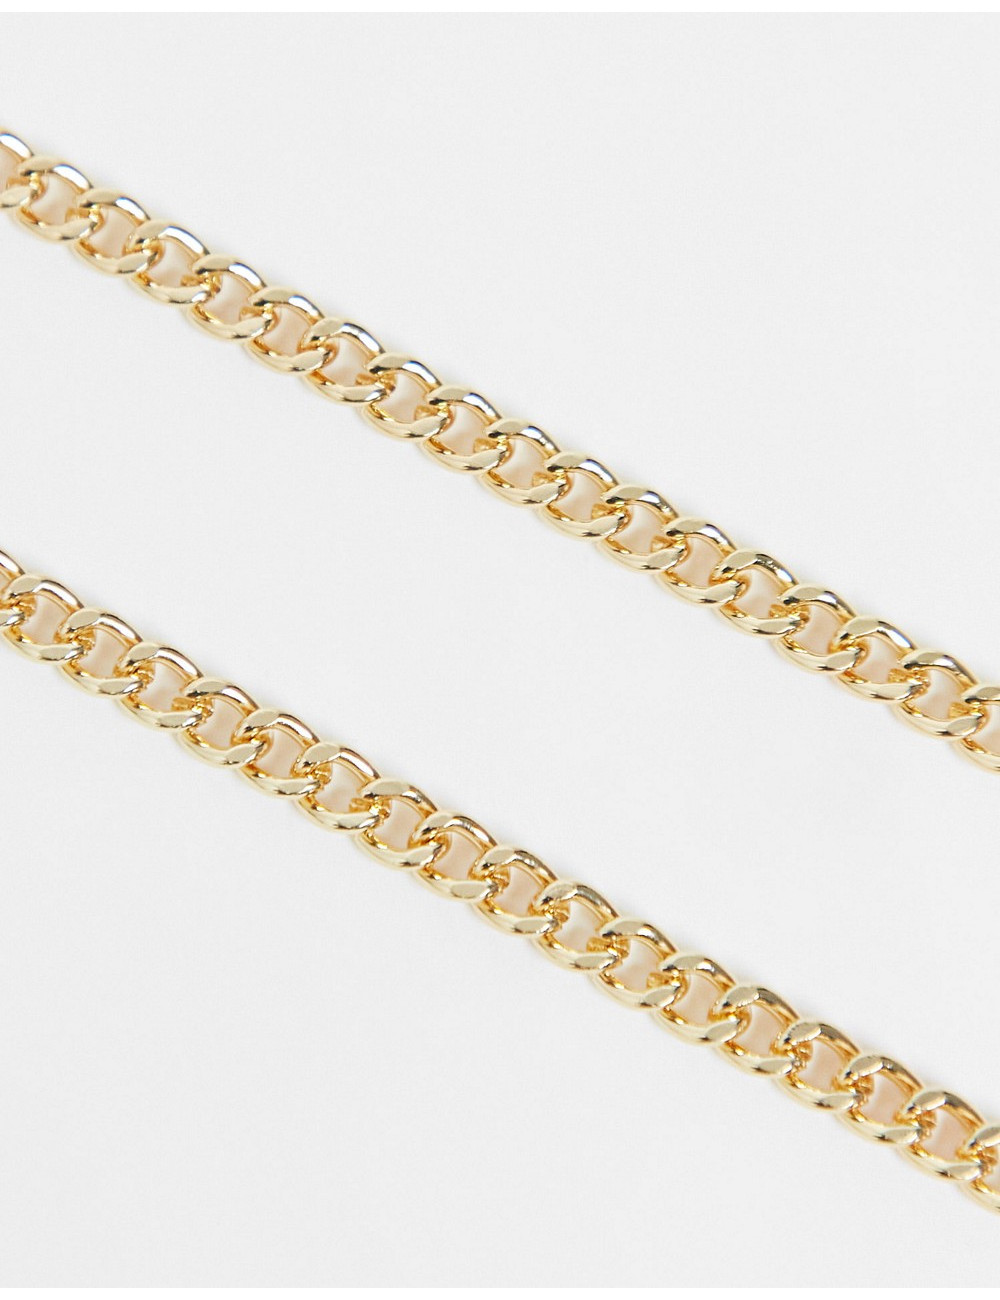 DesignB chain necklace in gold